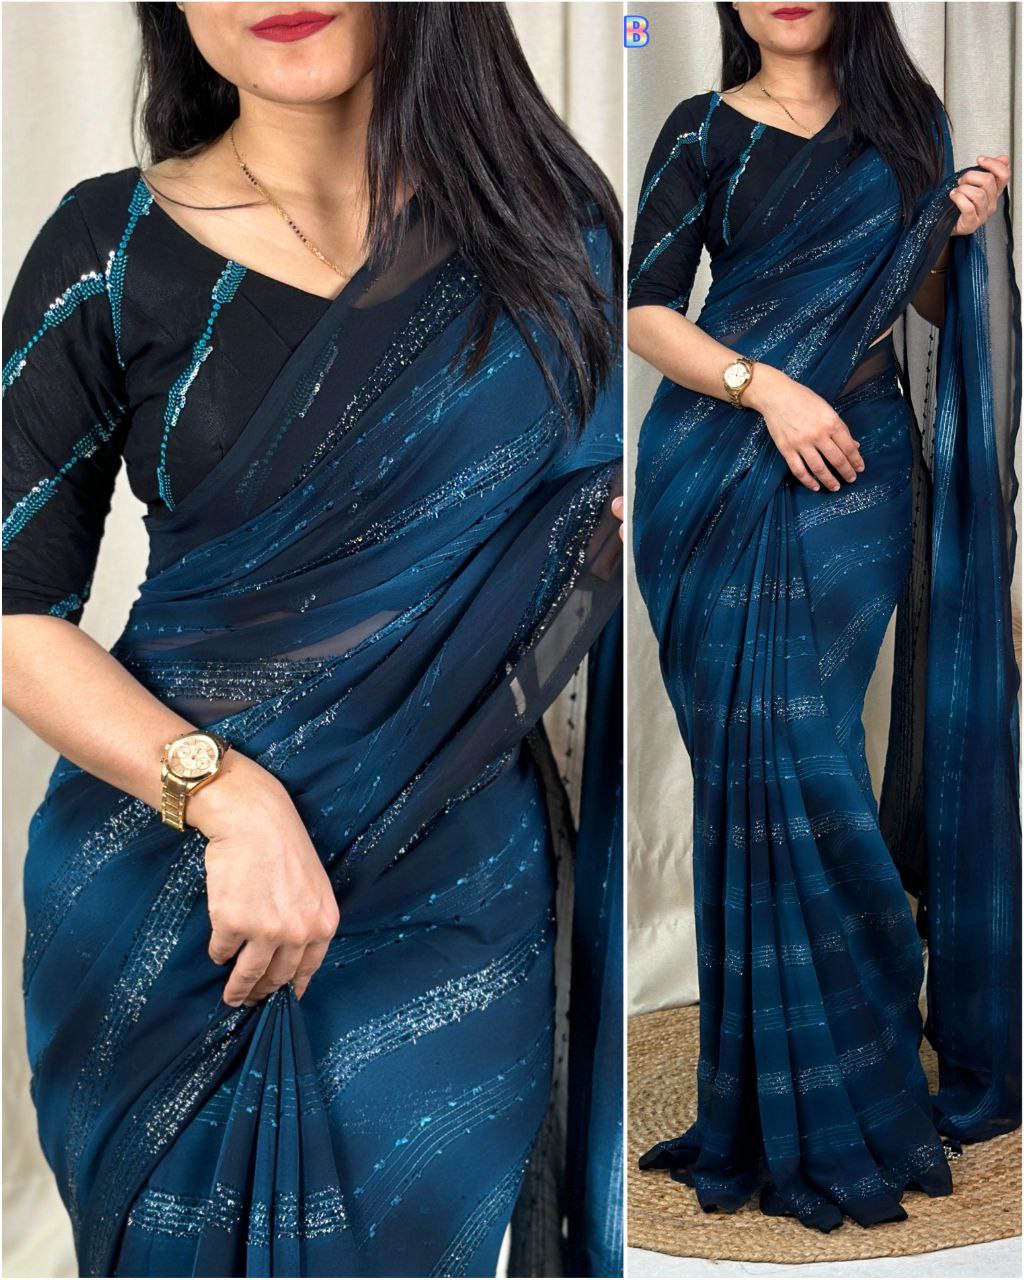 "Graceful Georgette: Vibrant Spray Print Saree with Sequin Blouse"